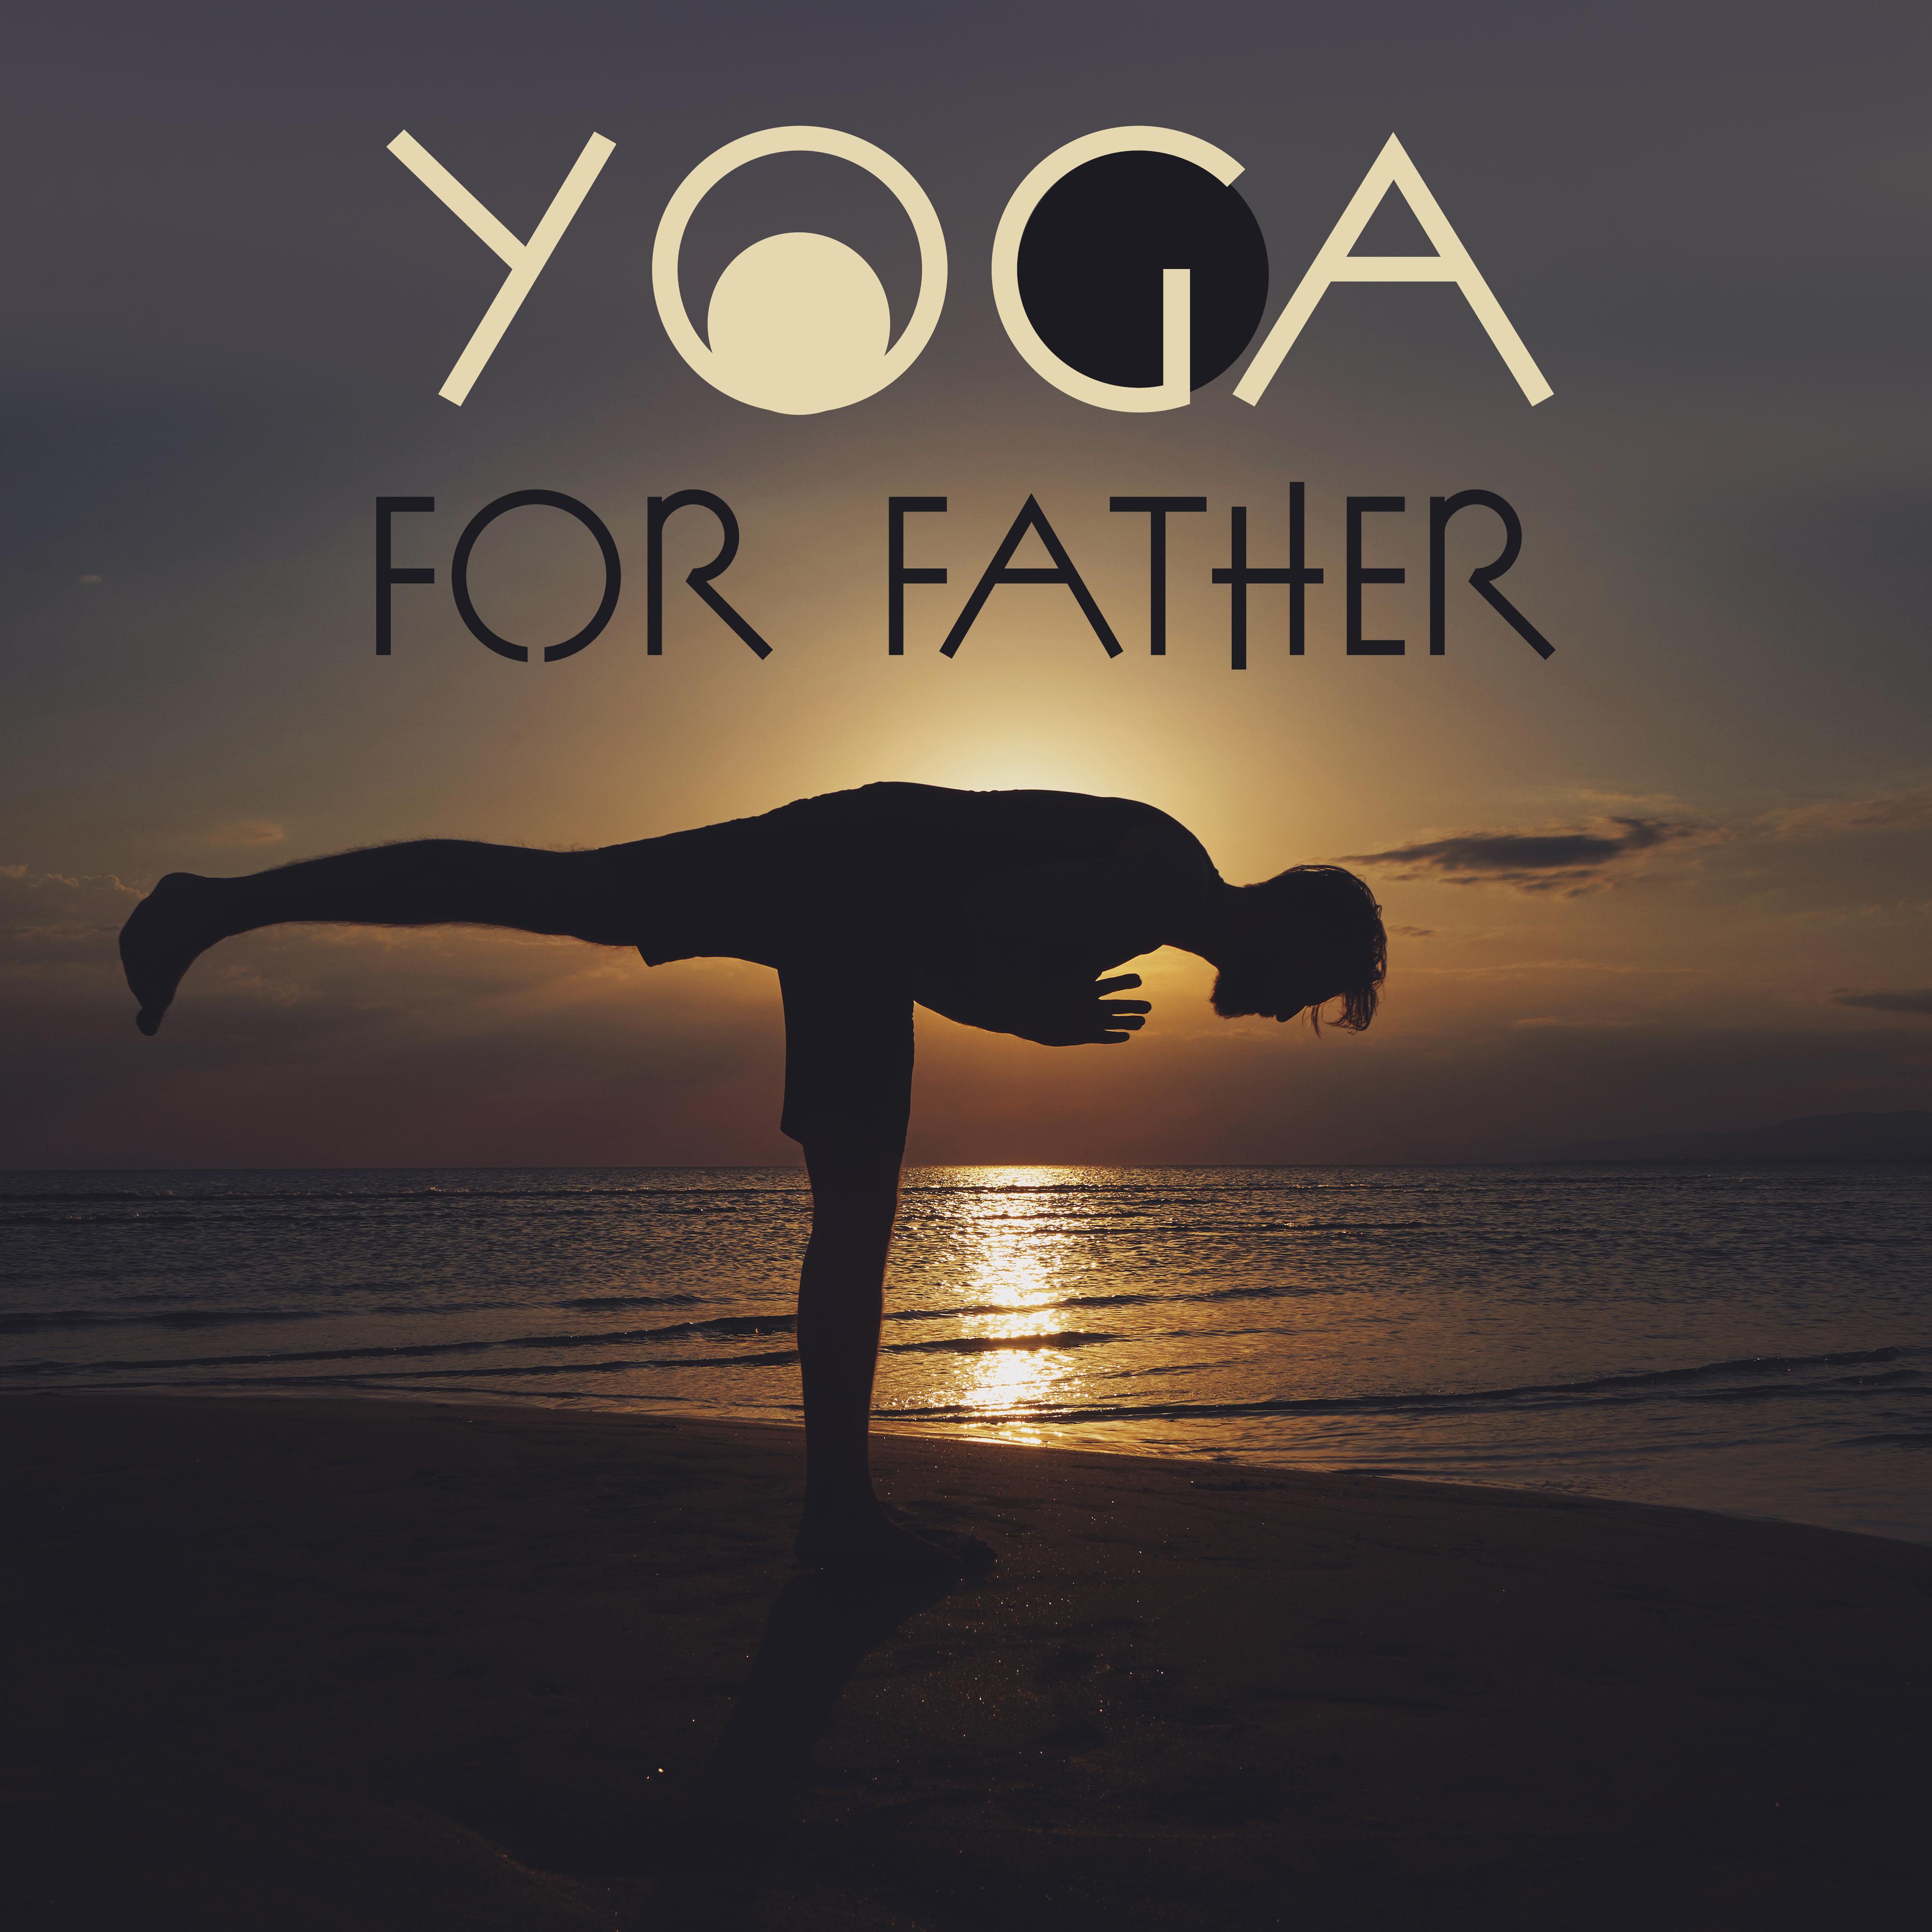 Yoga for Father: Meditation Therapy for Father’s Day, Yoga Training, Pure Mind, Meditation Music Zone, Zen Lounge, Calming Sounds Reduce Stress, Deep Harmony